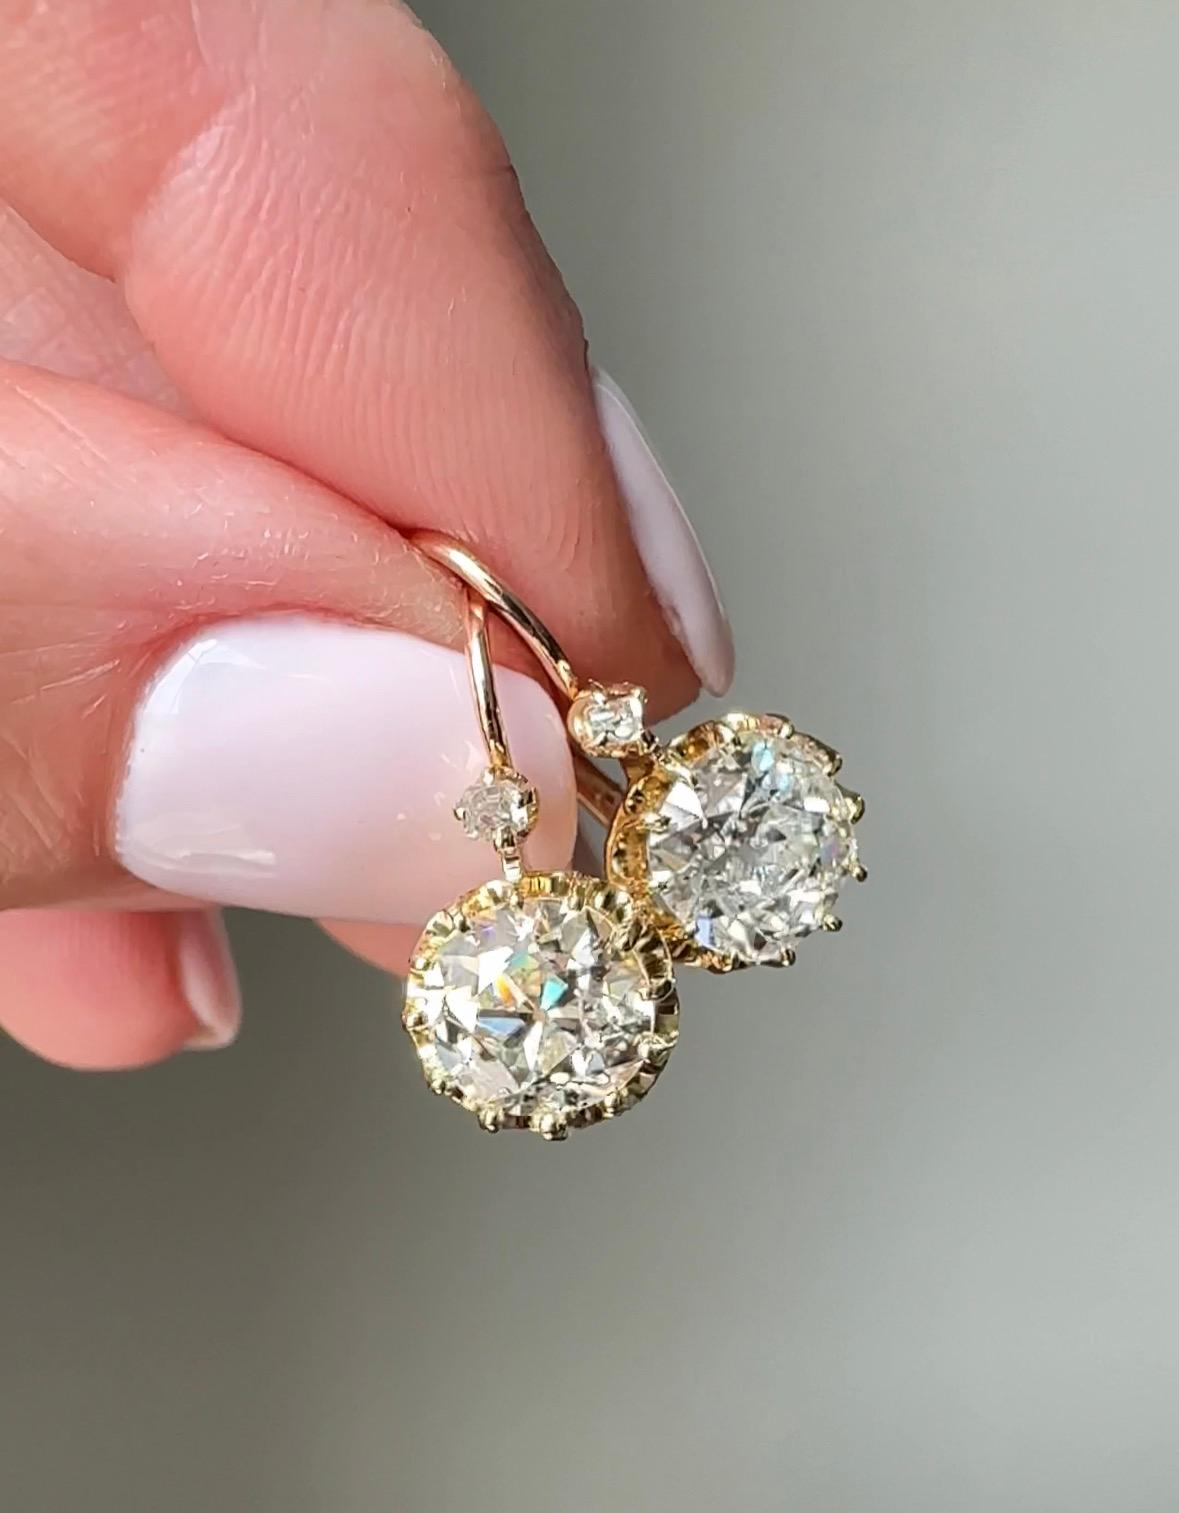 Victorian Late 19th C Old Cut Diamond Earrings 2.95 Carats - GIA For Sale